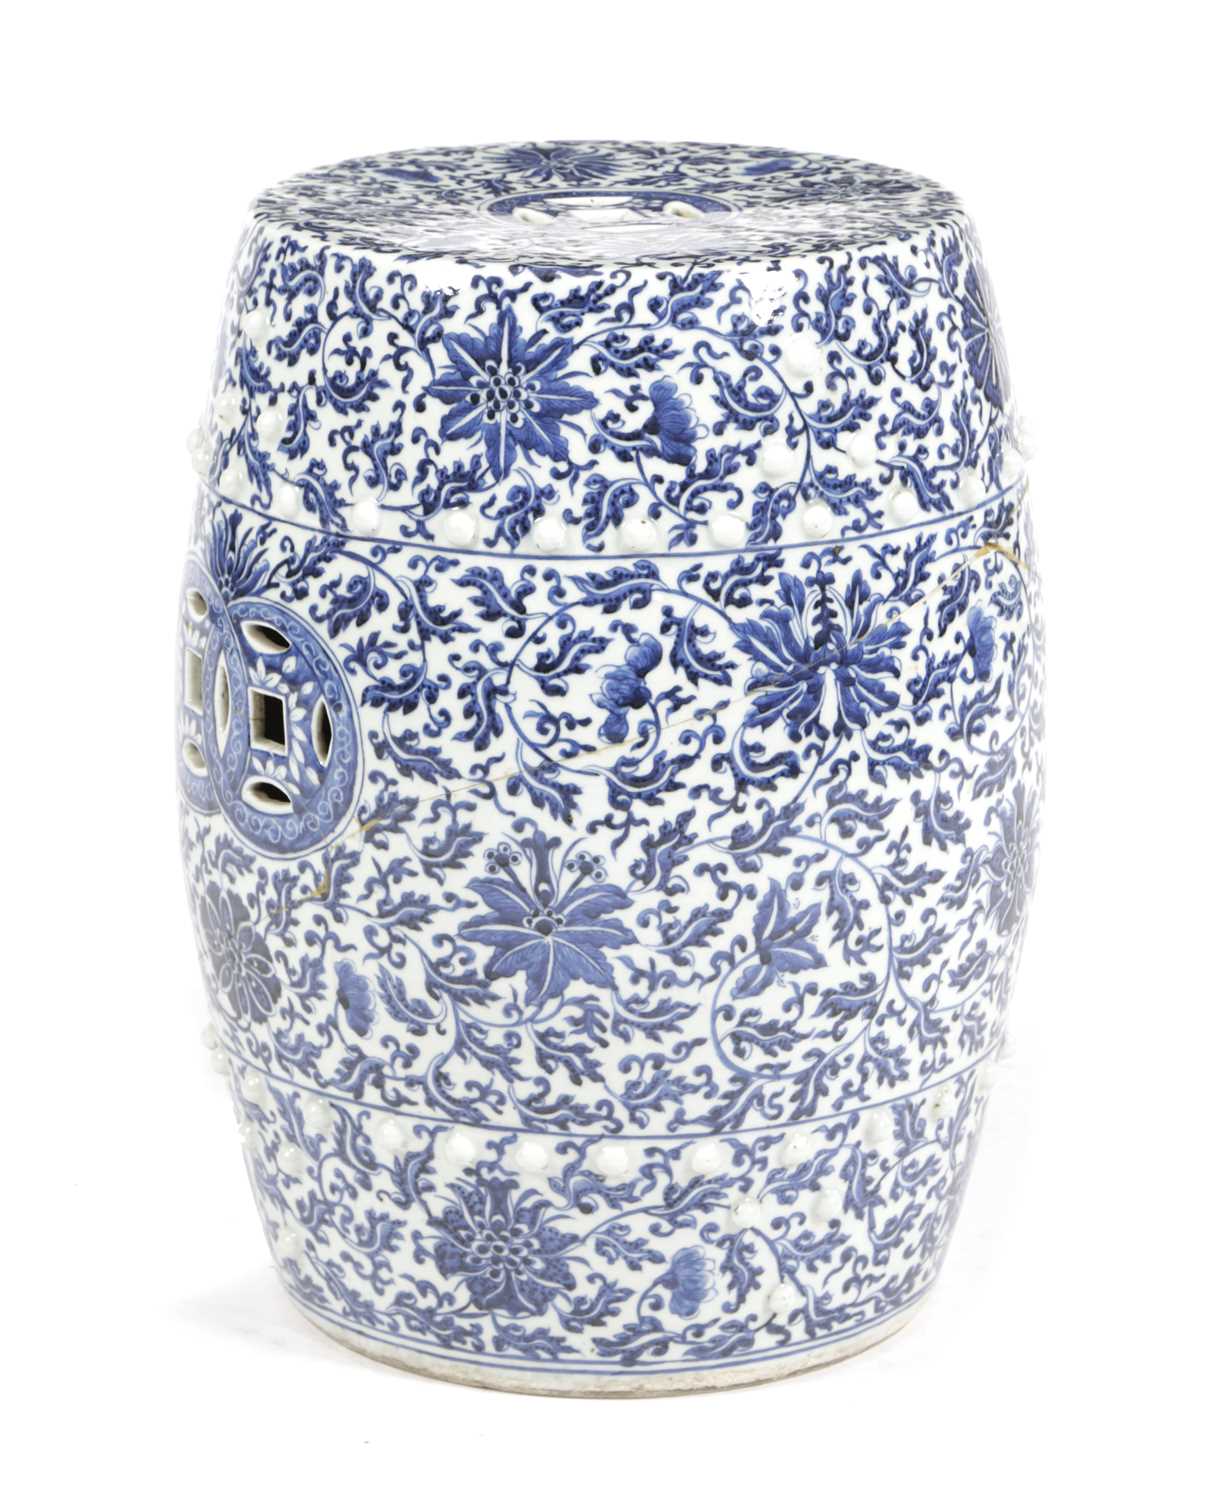 A CHINESE PORCELAIN BLUE AND WHITE GARDEN SEAT 19TH CENTURY of barrel form, with pierced and moulded